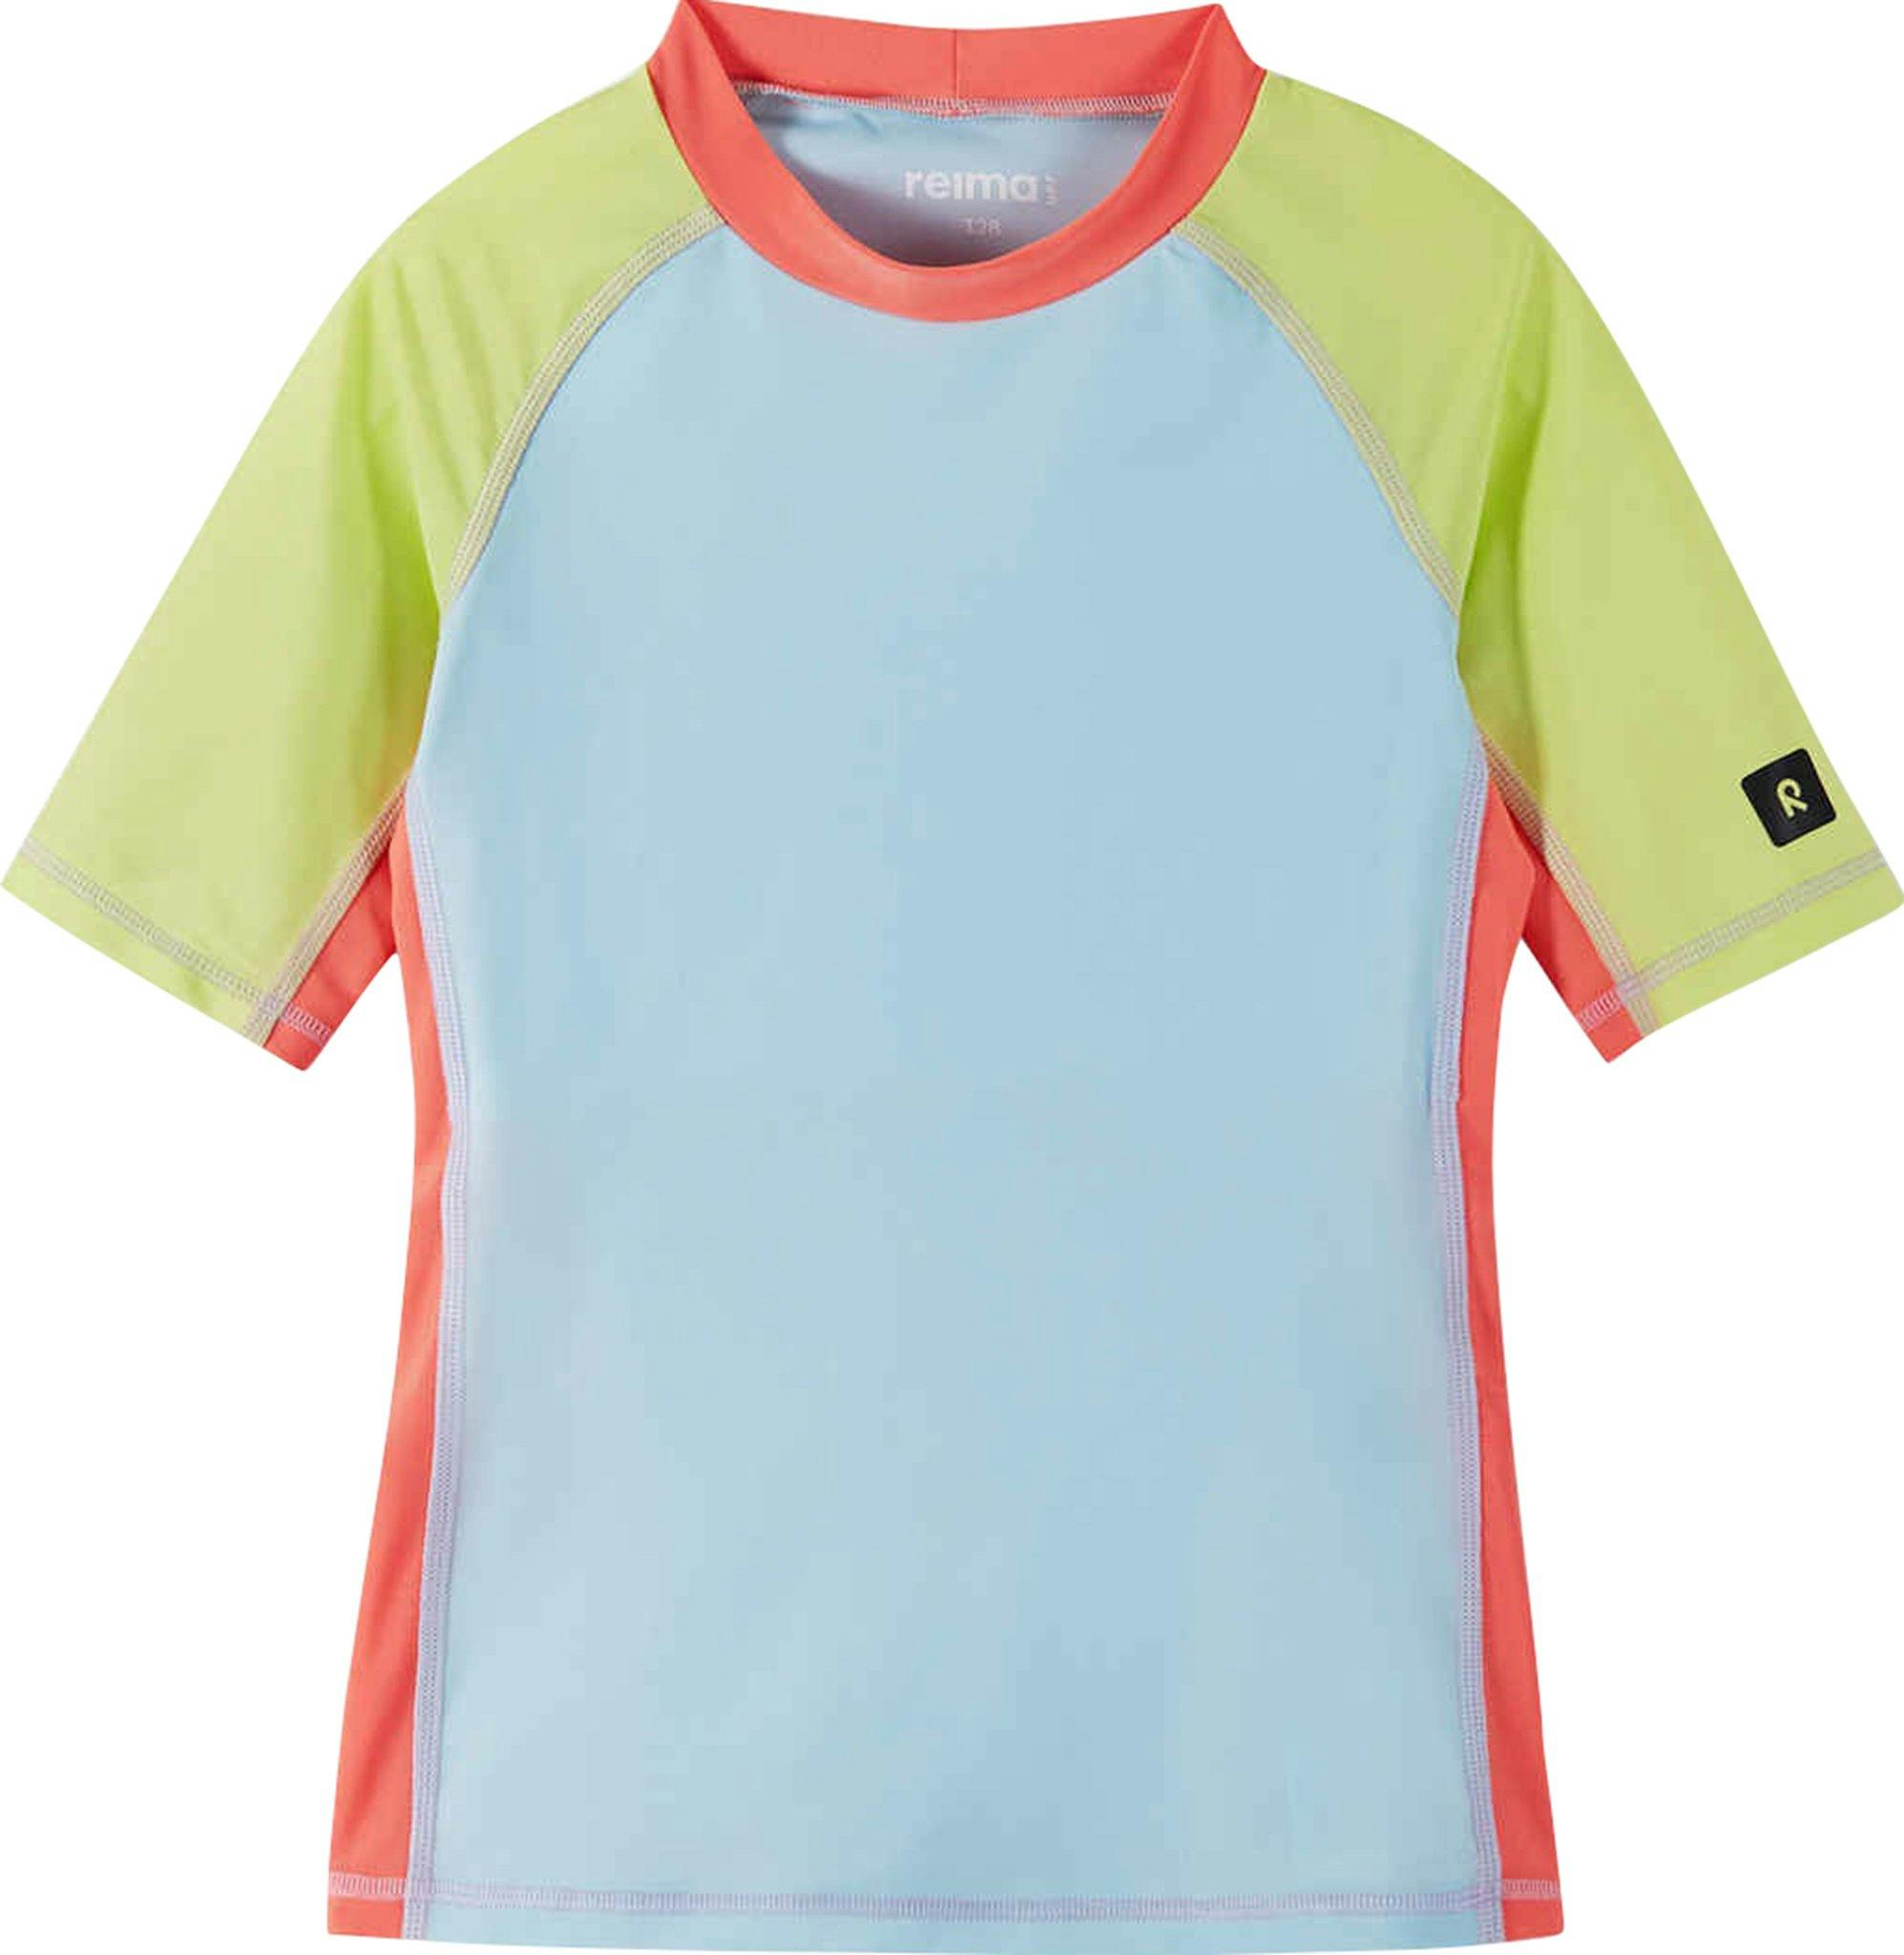 Product image for Joonia Swim T-Shirt - Youth